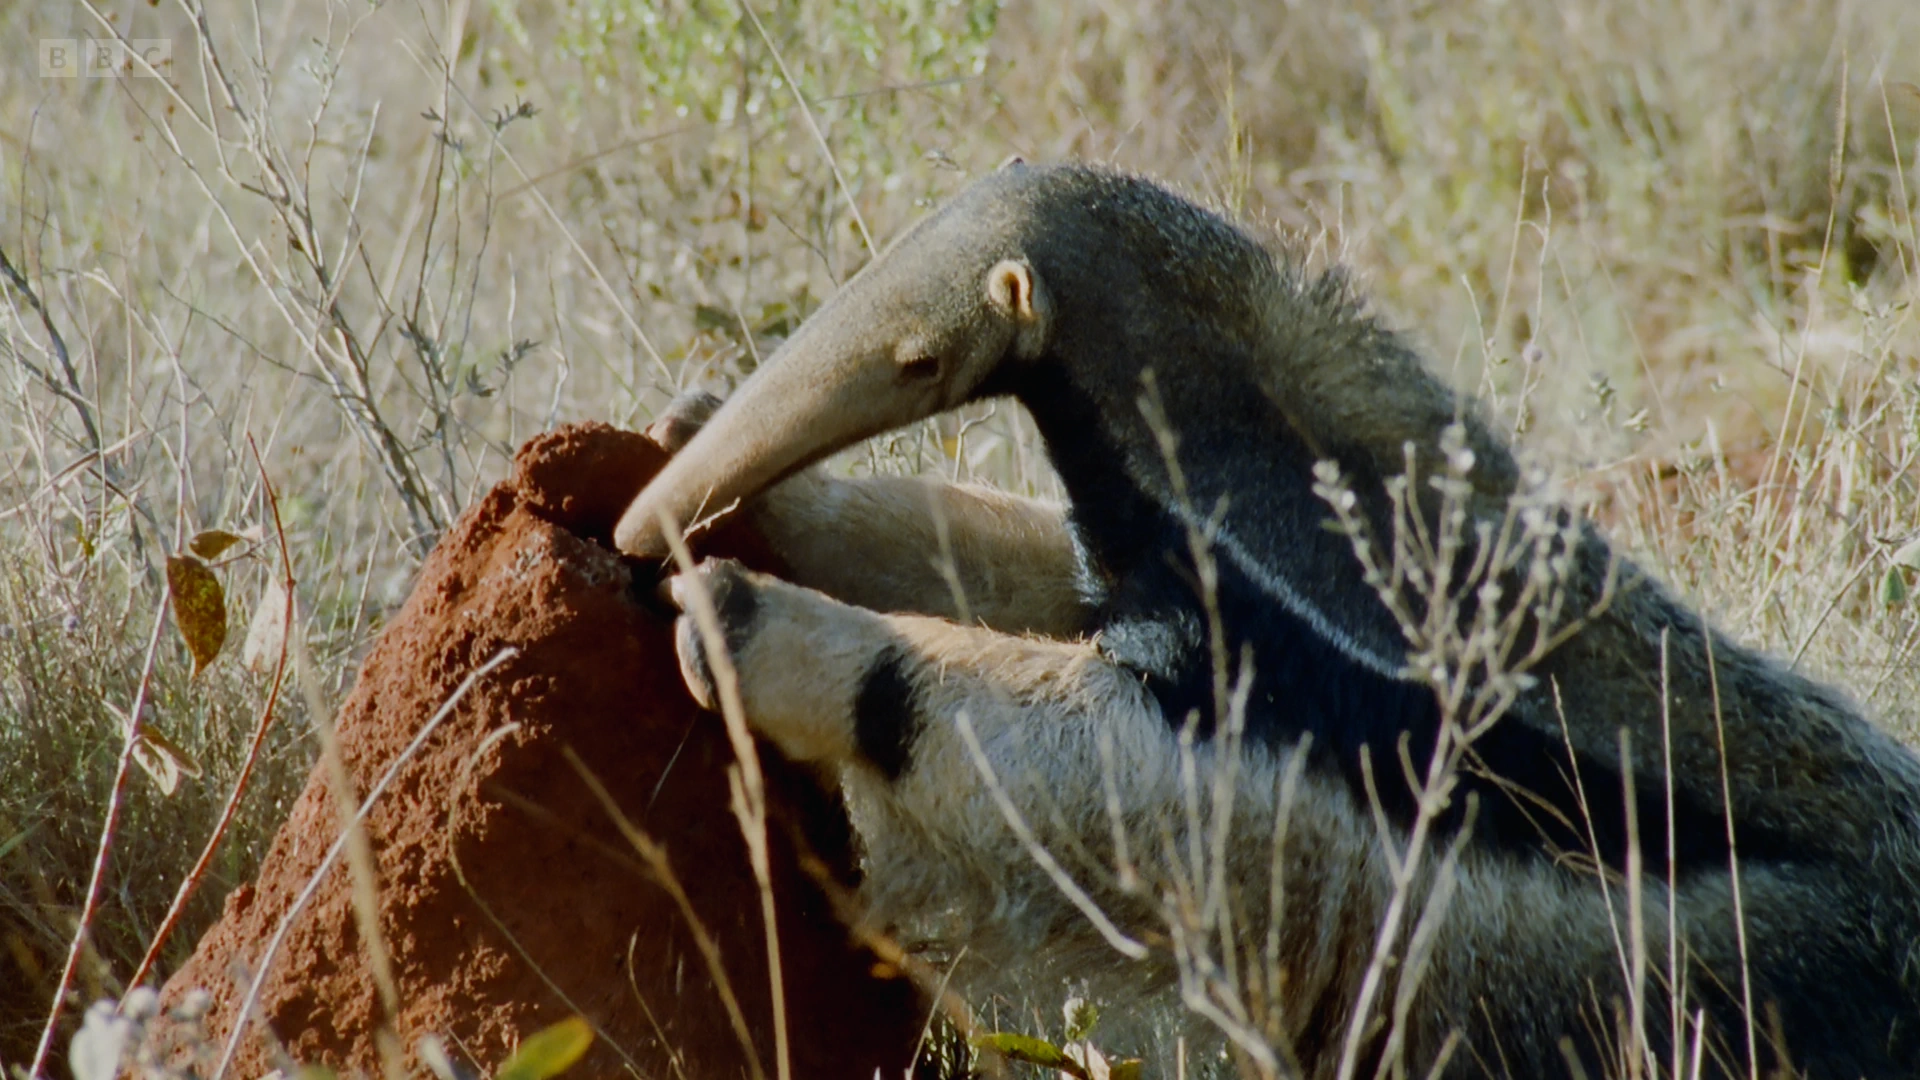 Giant anteater (Myrmecophaga tridactyla) as shown in Planet Earth II - Grasslands